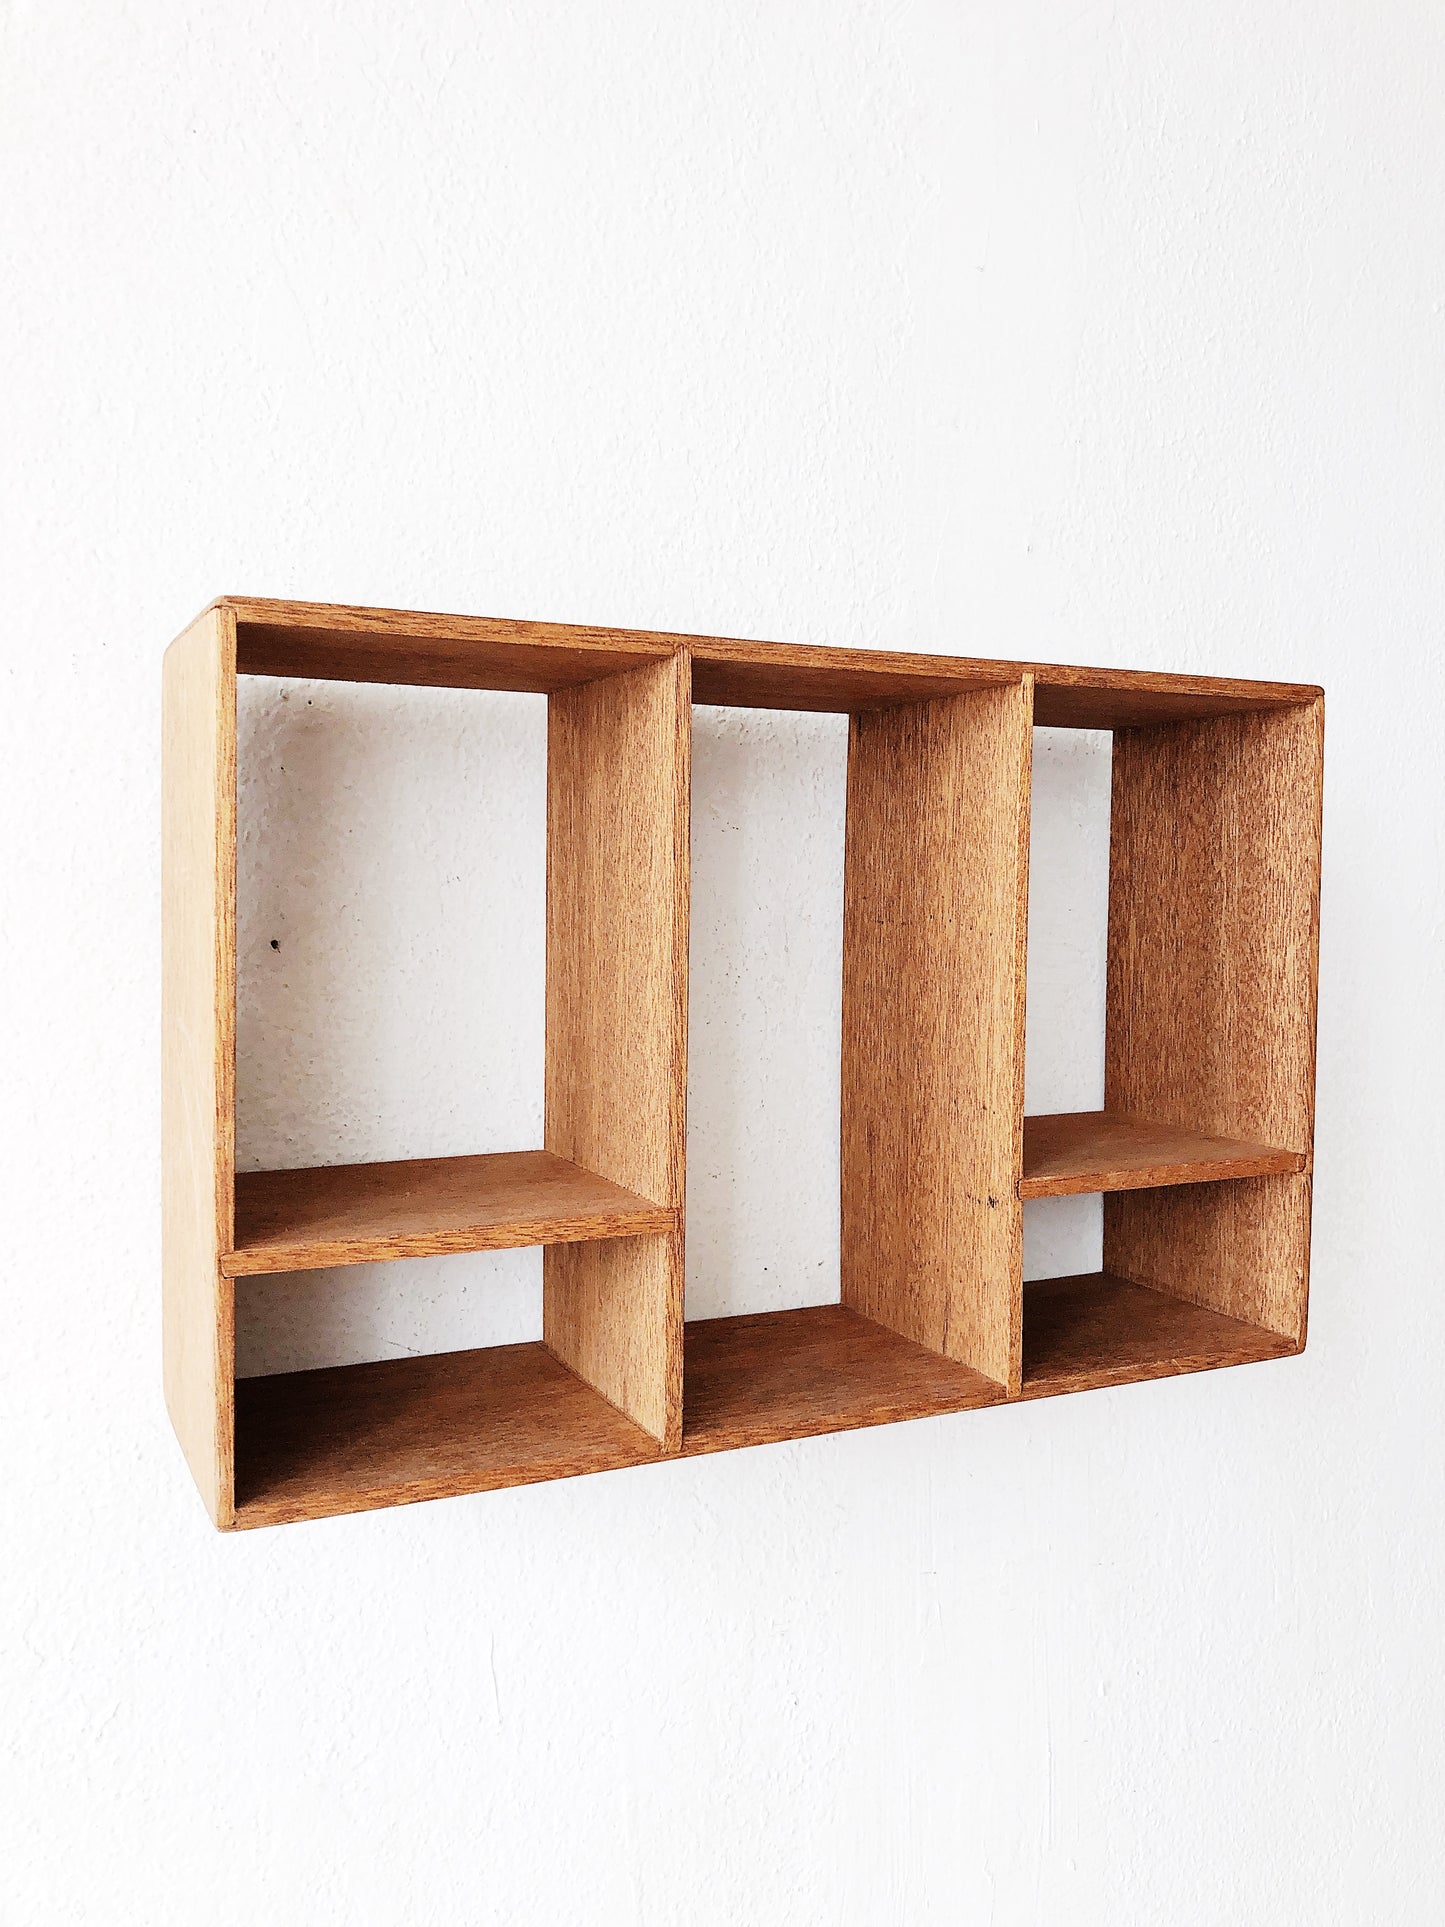 Vintage Divided Cubby Shelf